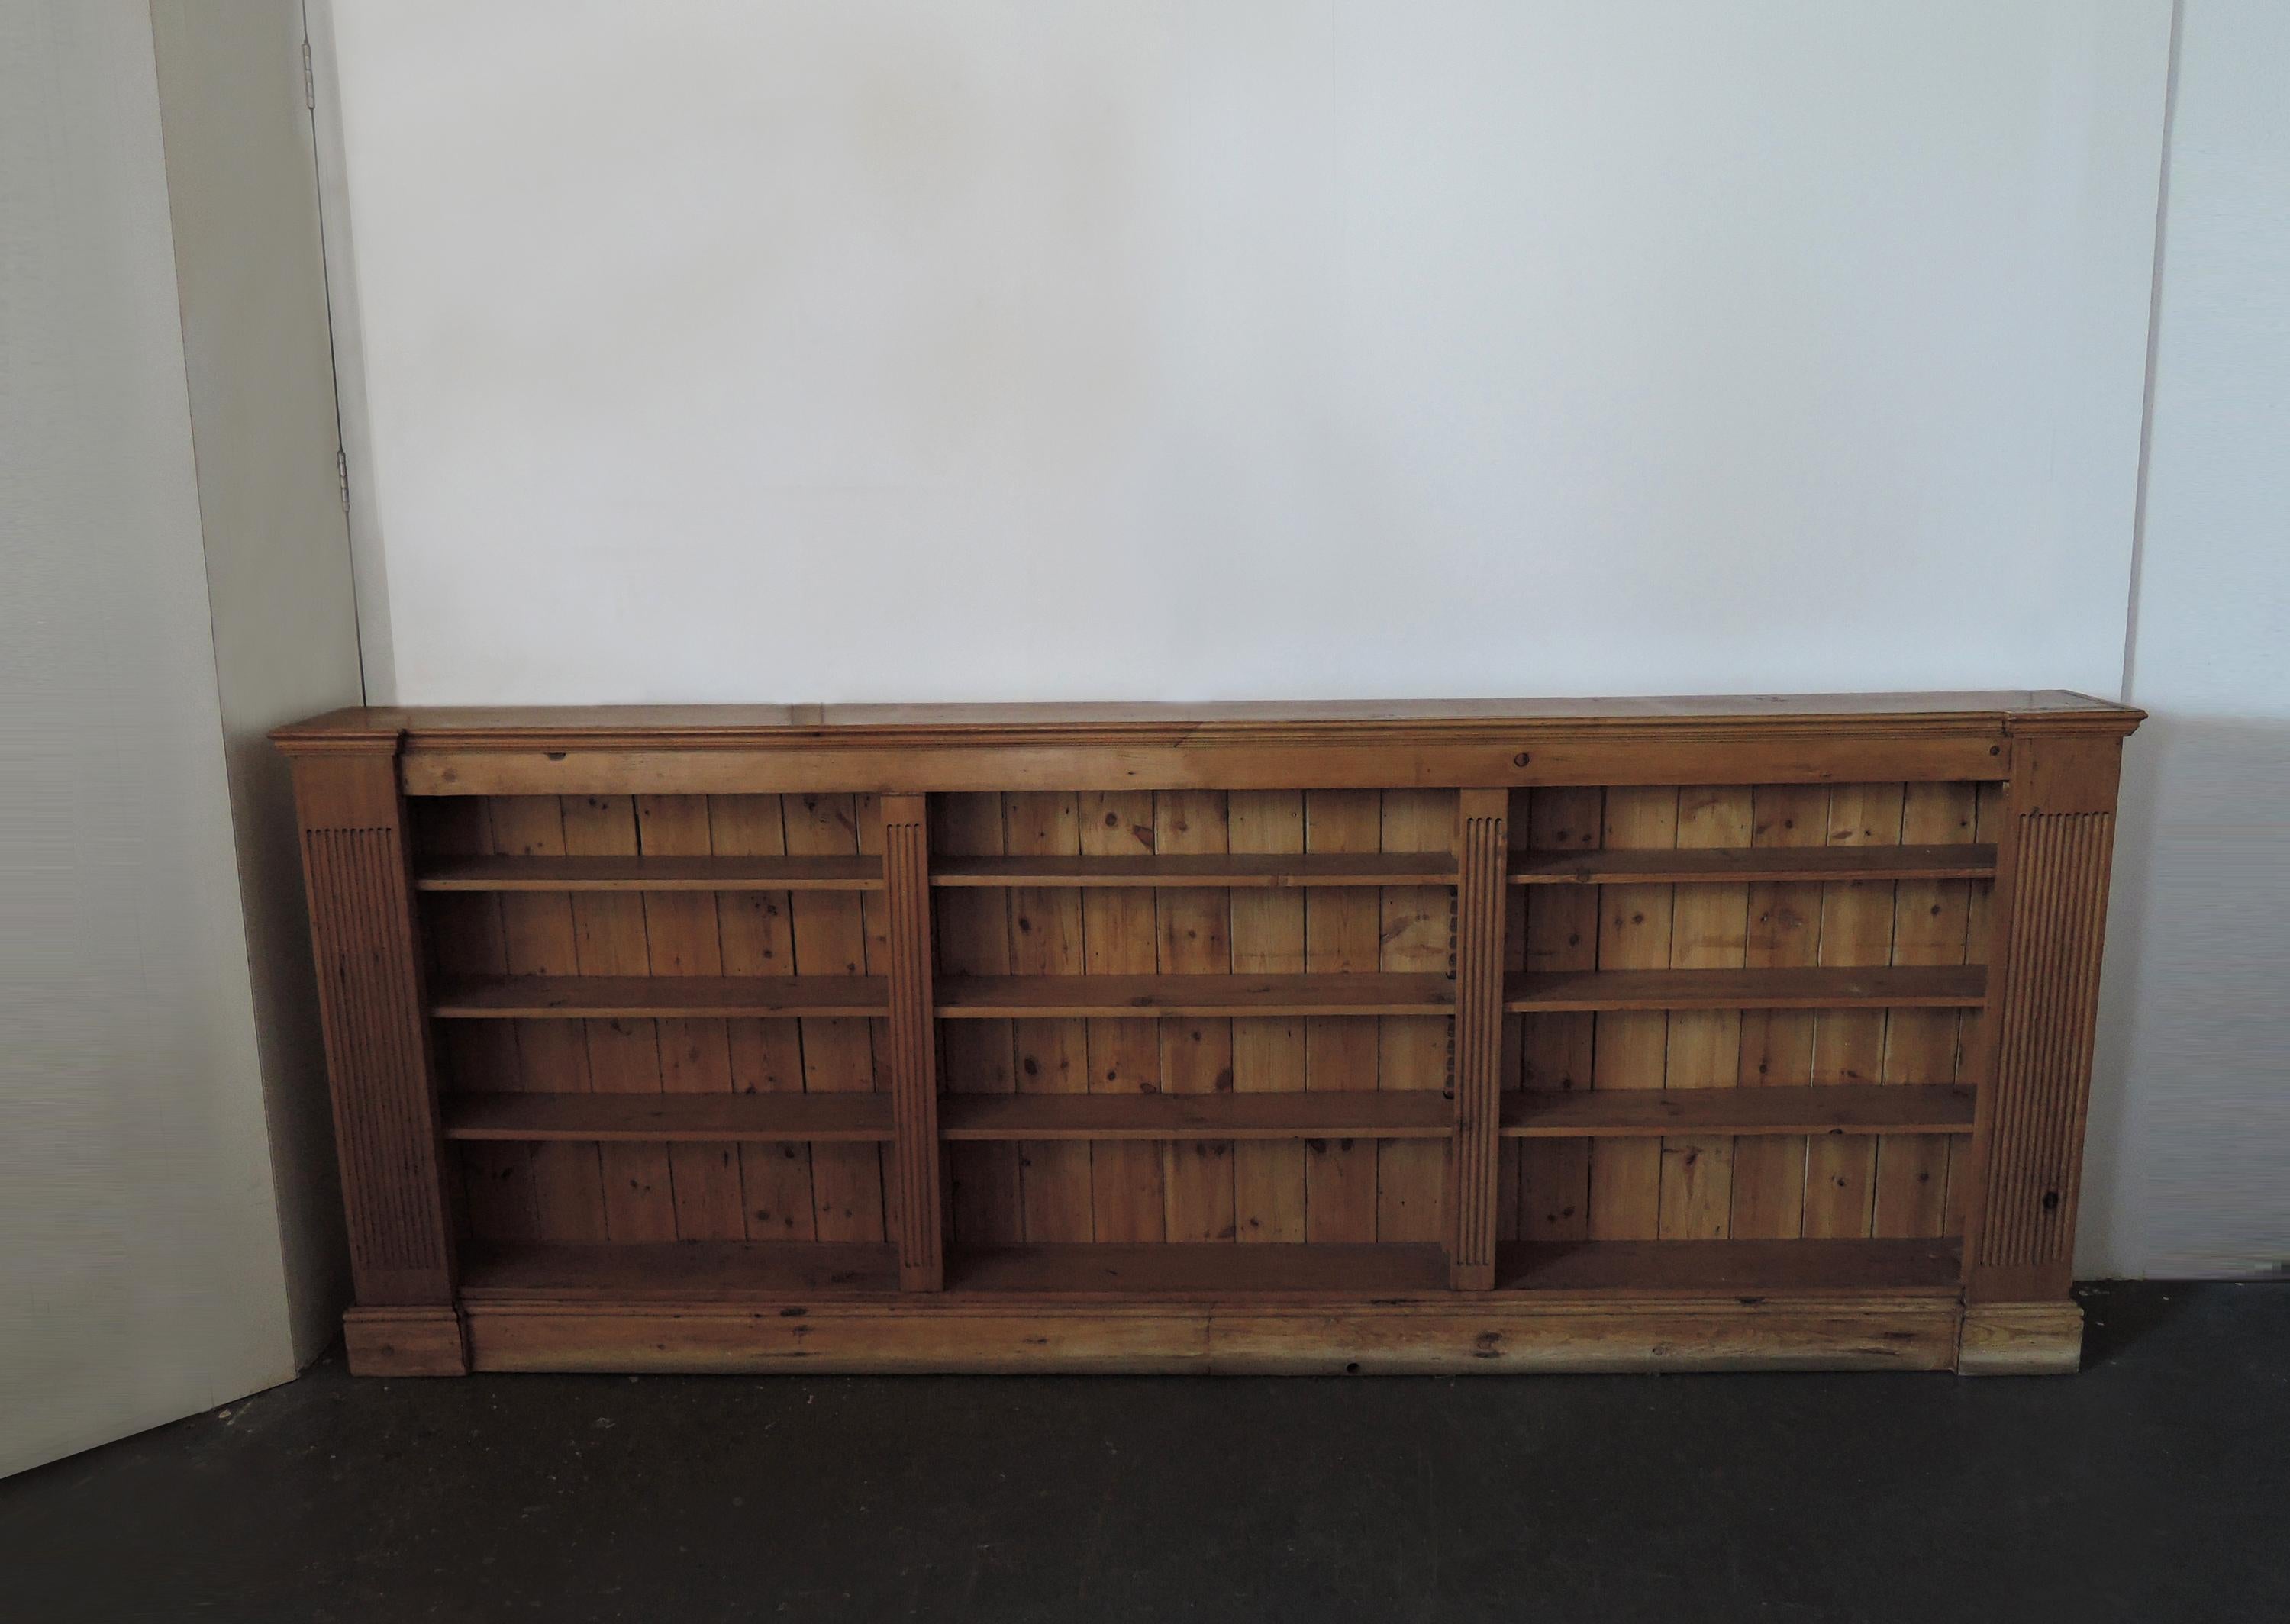 A large French neoclassical Louis XVI style pine bookcase - Shelving unit.